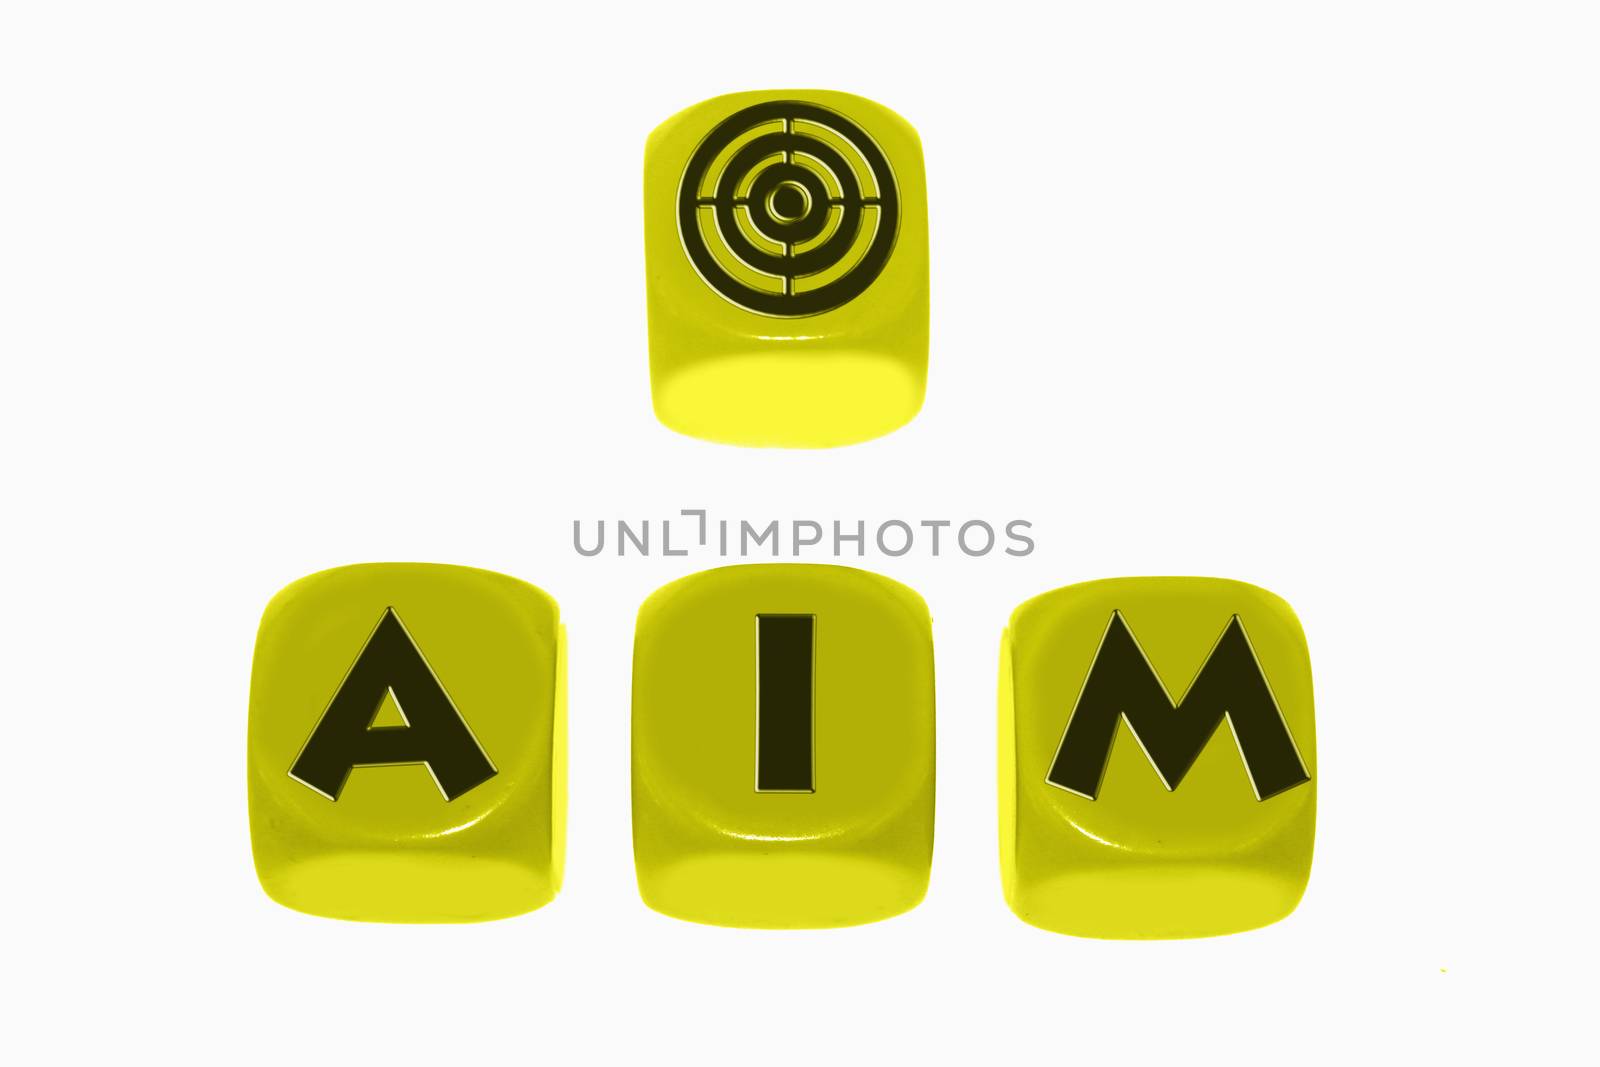 aim symbol with word AIM on cubes by yands